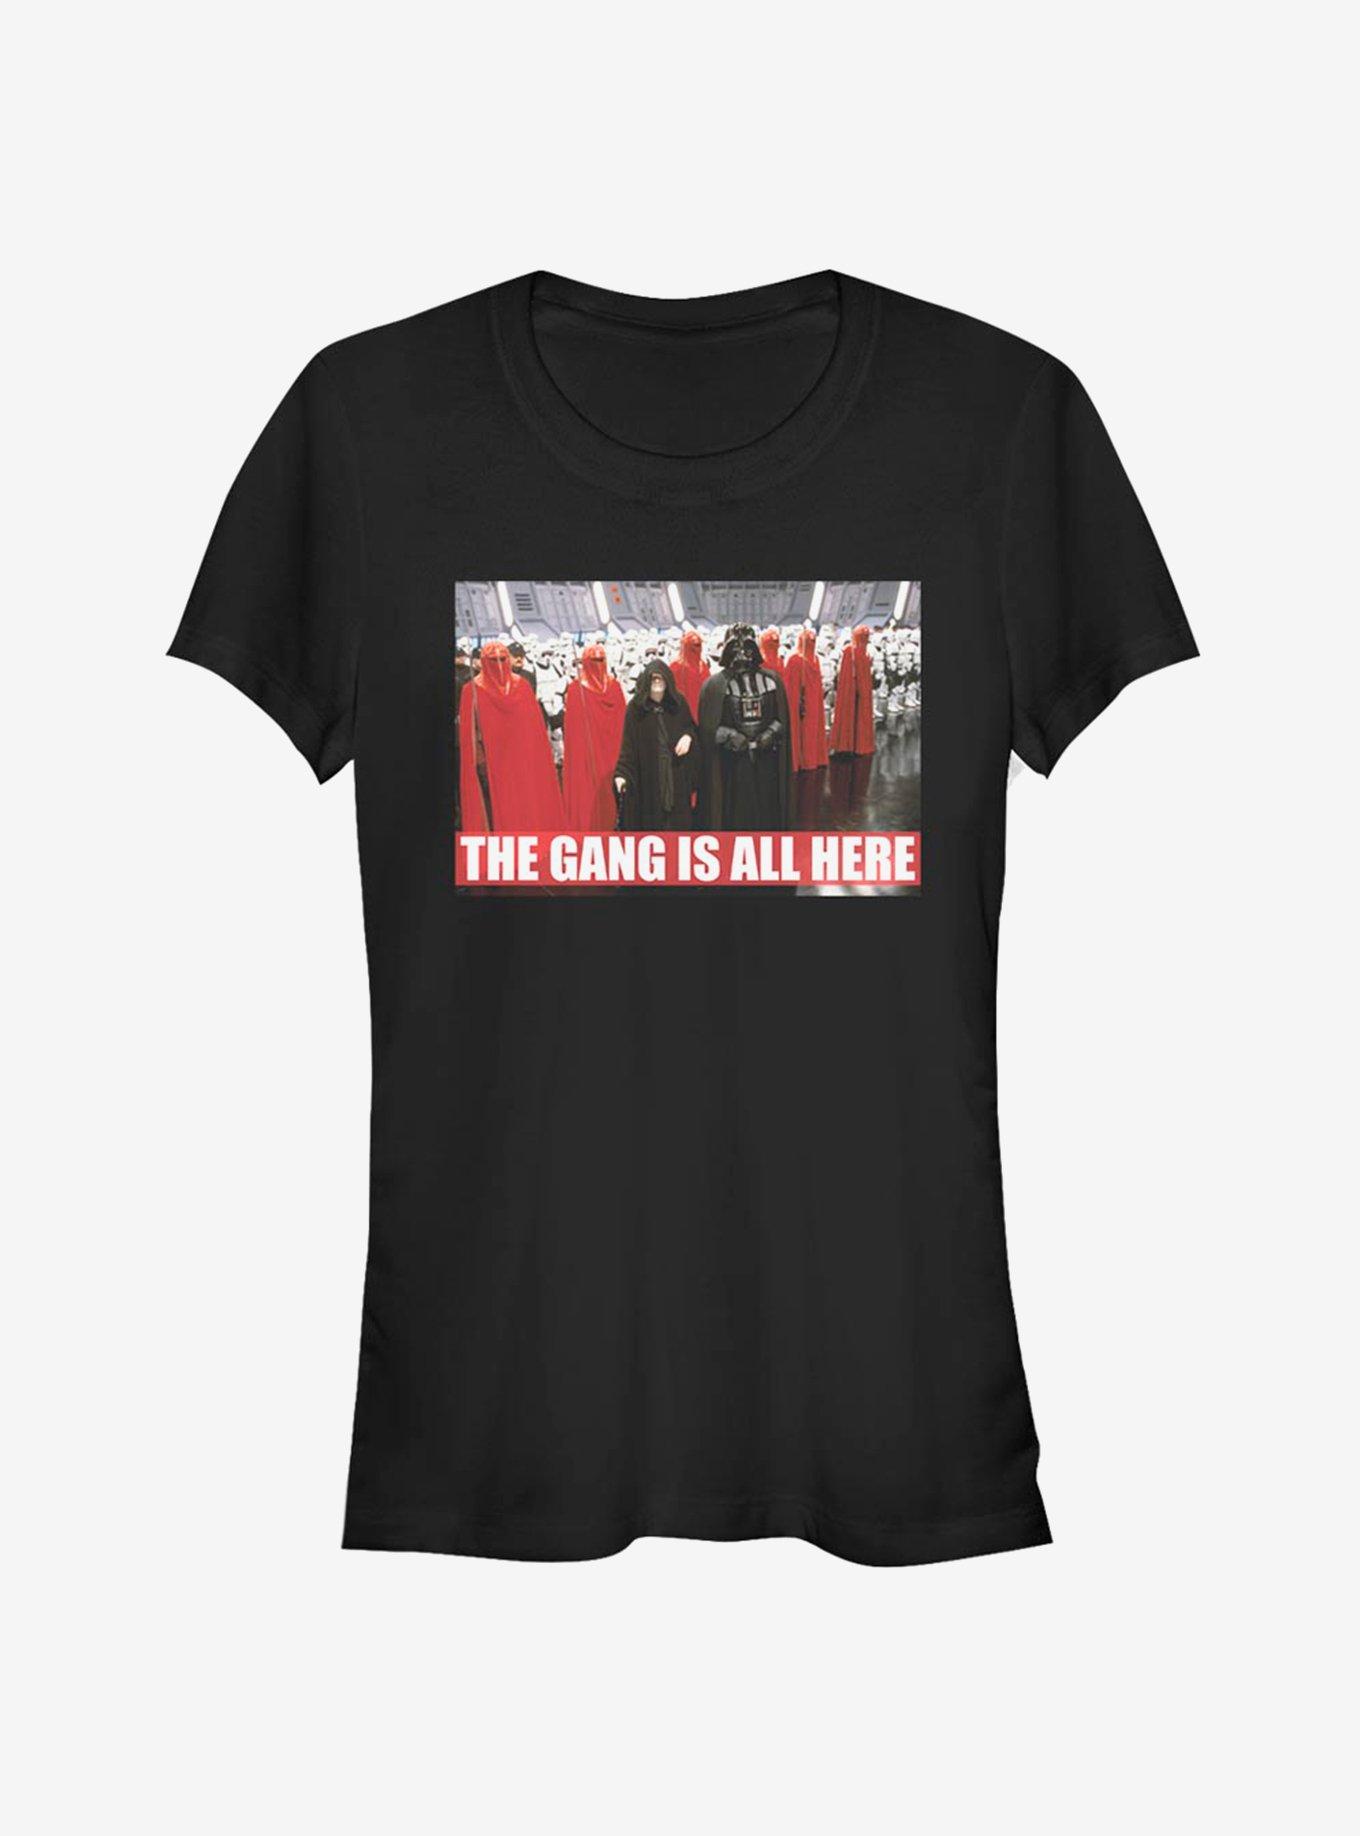 Star Wars The Gang Is All Here Girls T-Shirt, BLACK, hi-res